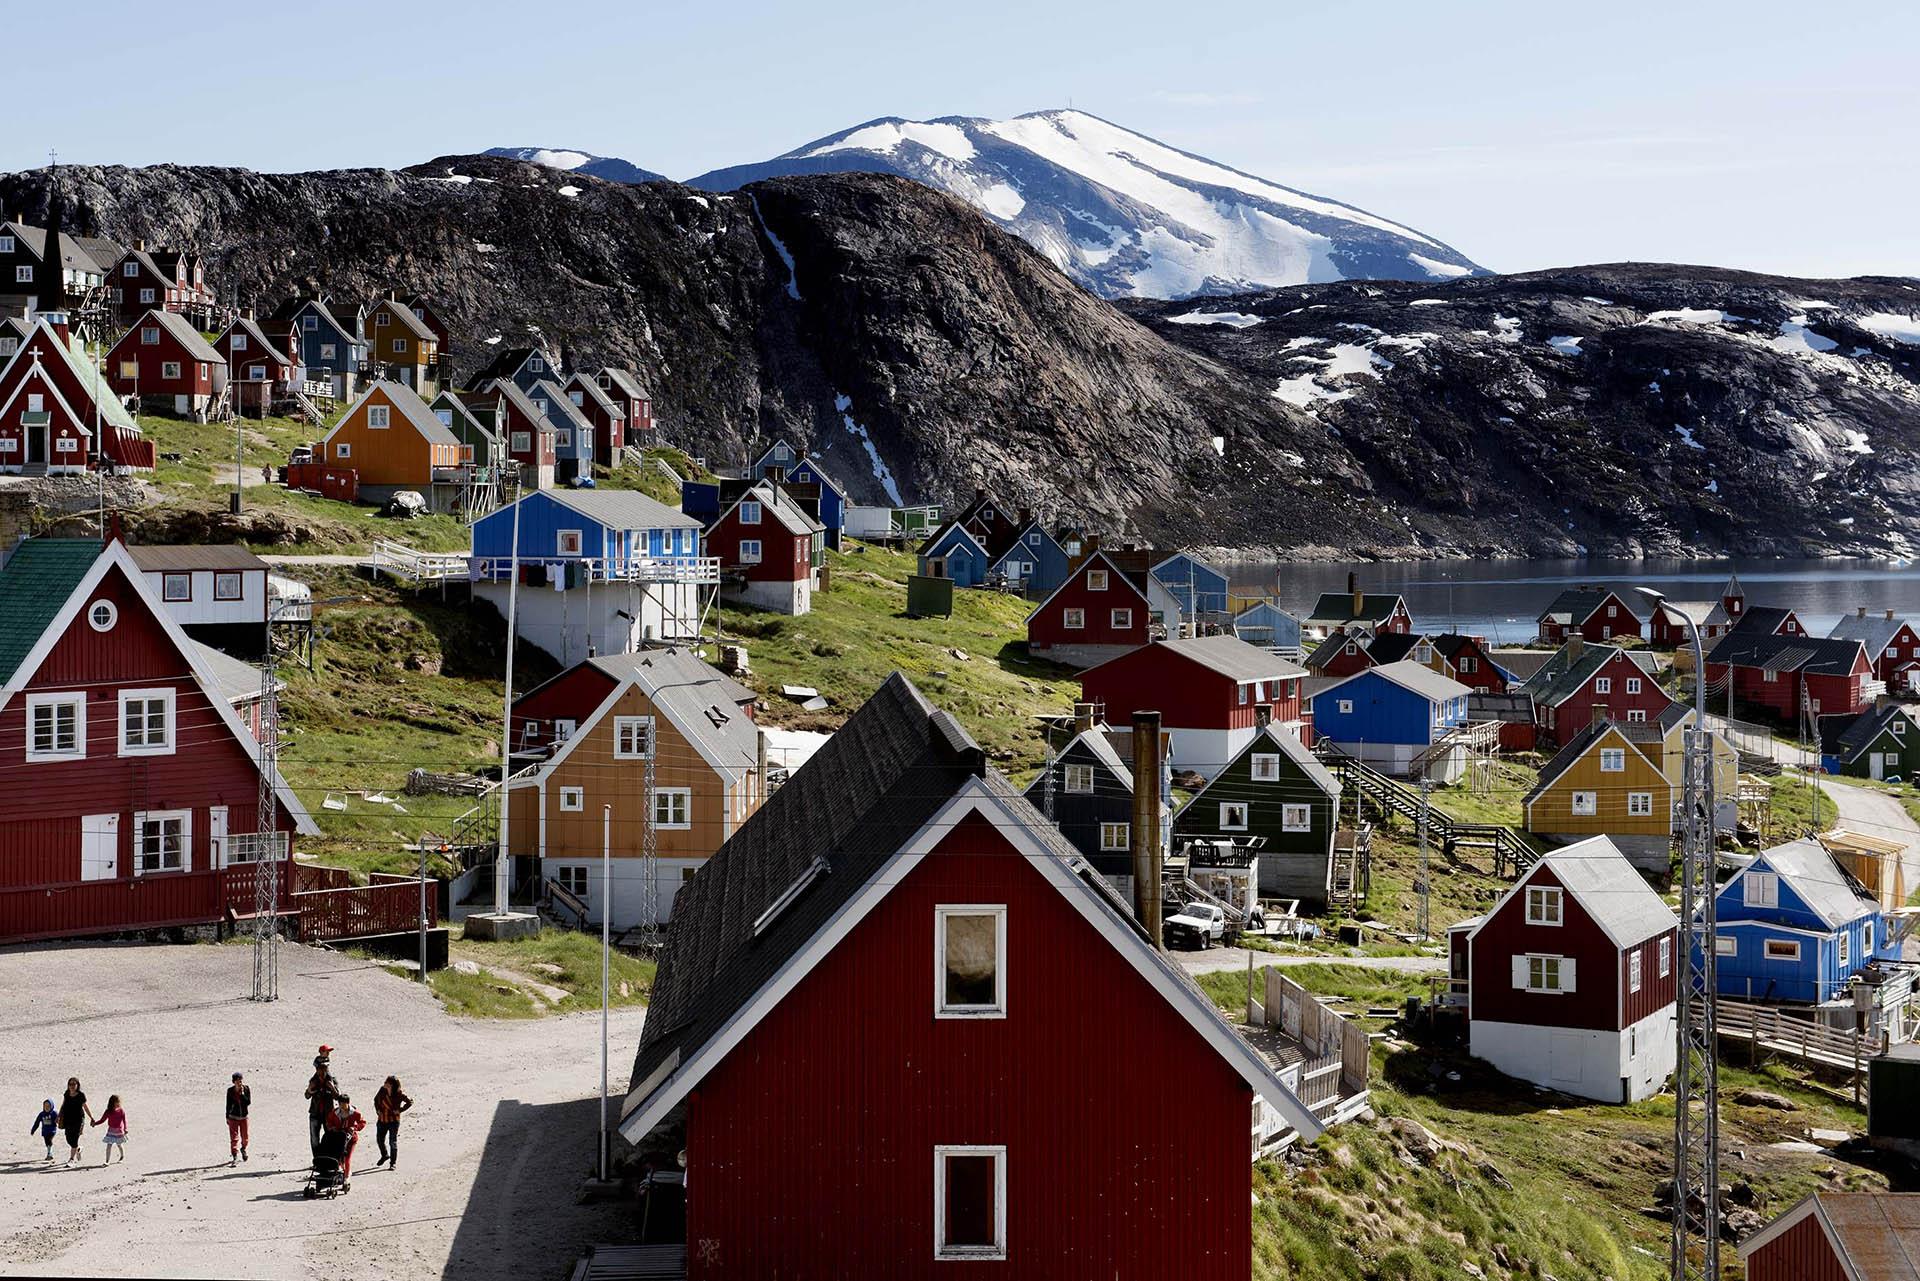 This July 11, 2015 file photo shows a general view of the town of Upernavik in western Greenland. (Linda Kastrup / Ritzau Scanpix via AP)